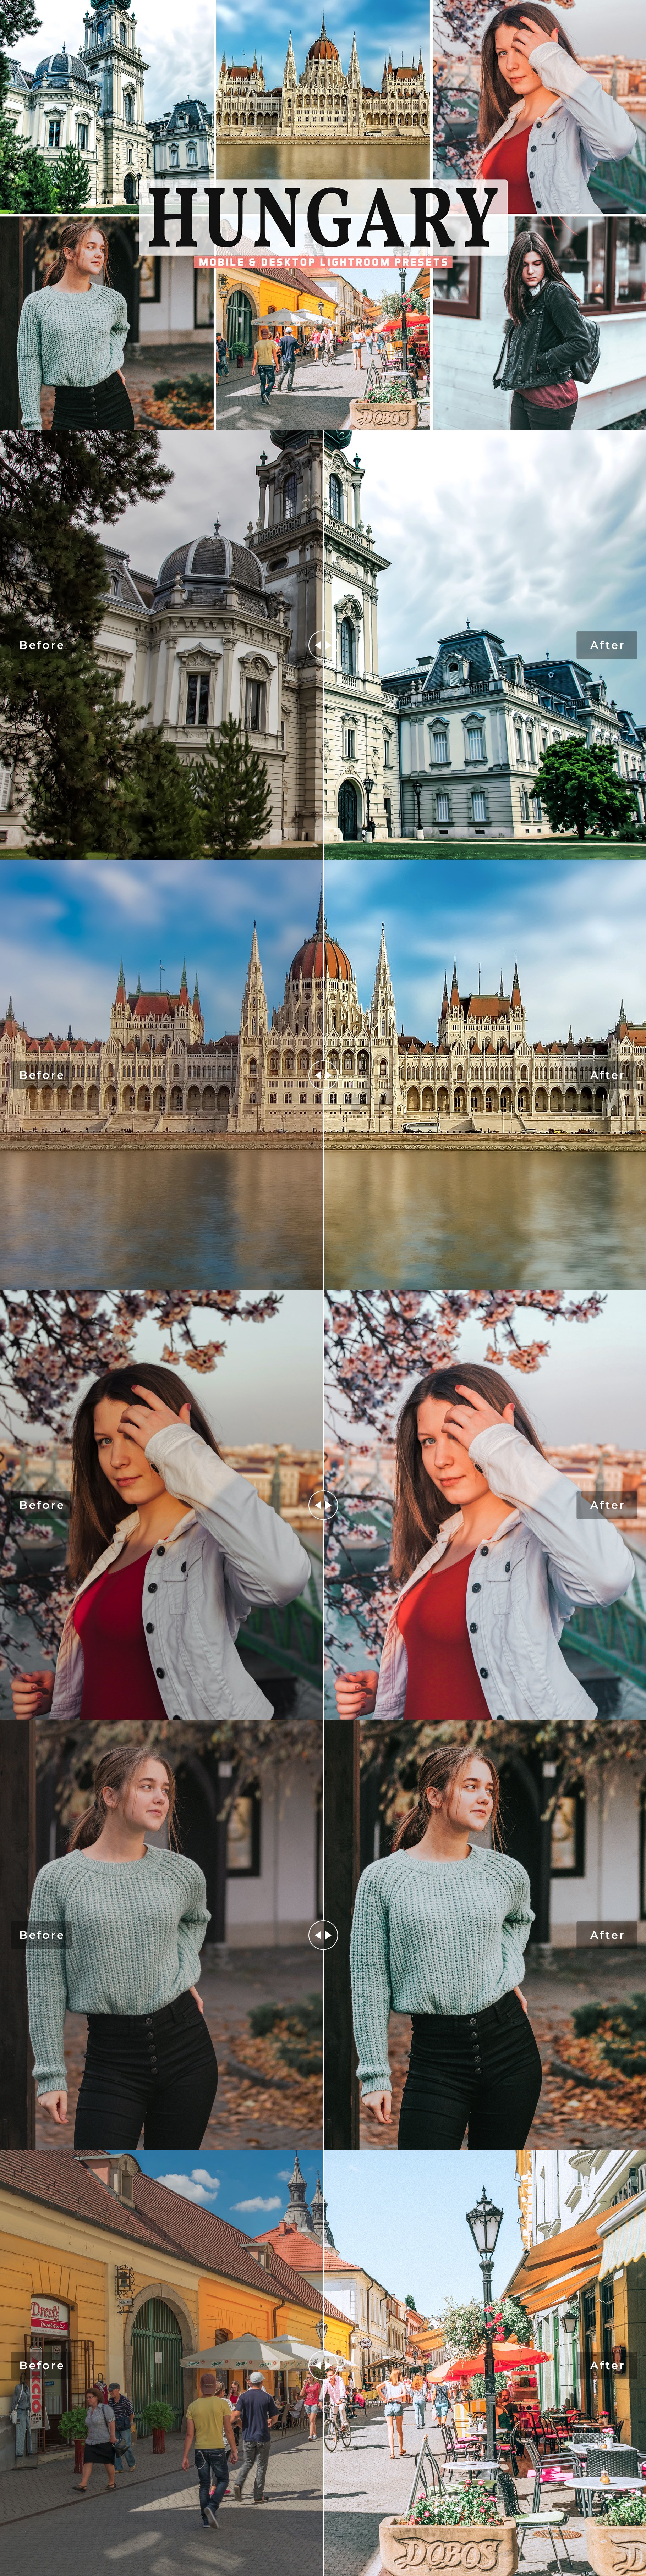 Hungary Pro Lightroom Presetscover image.